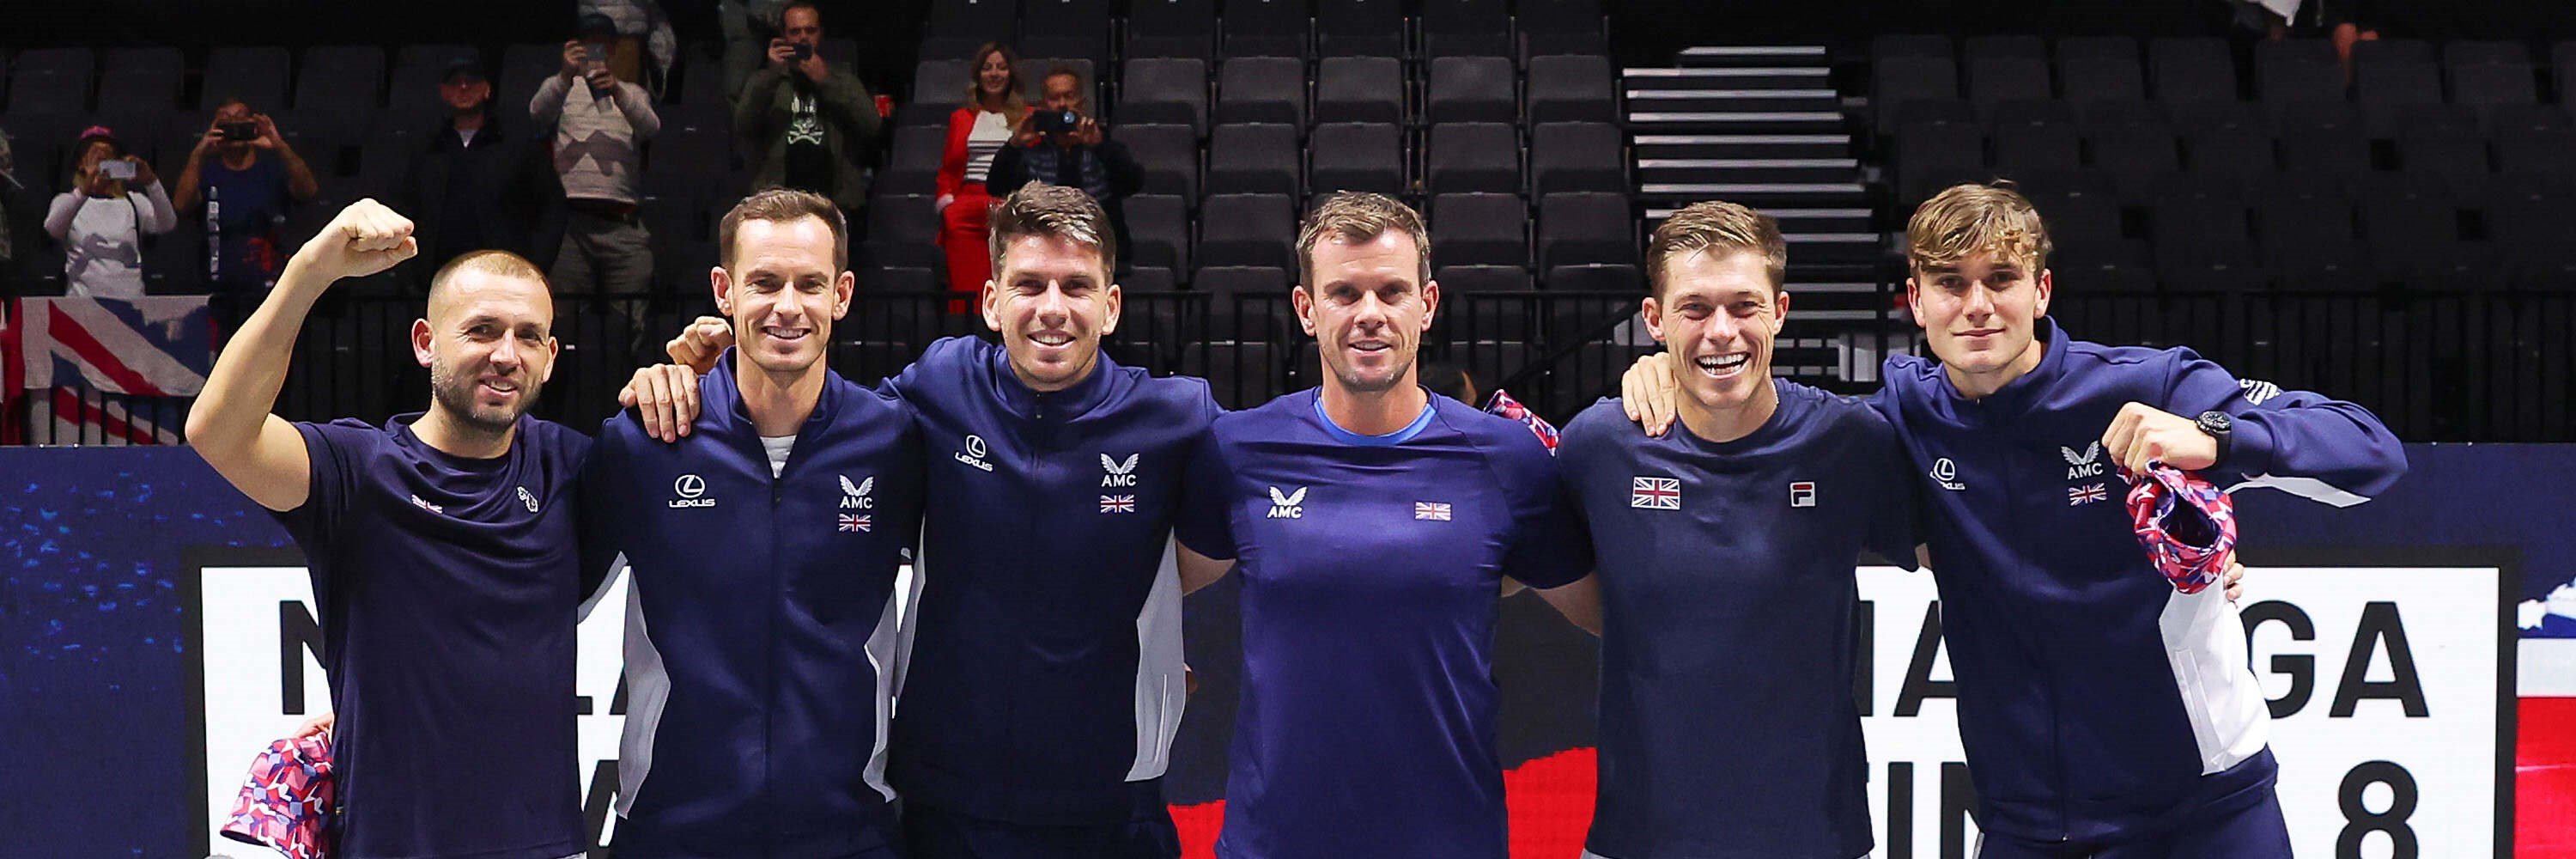 The Lexus GB Davis Cup squad celebrating their win in Manchester 2023